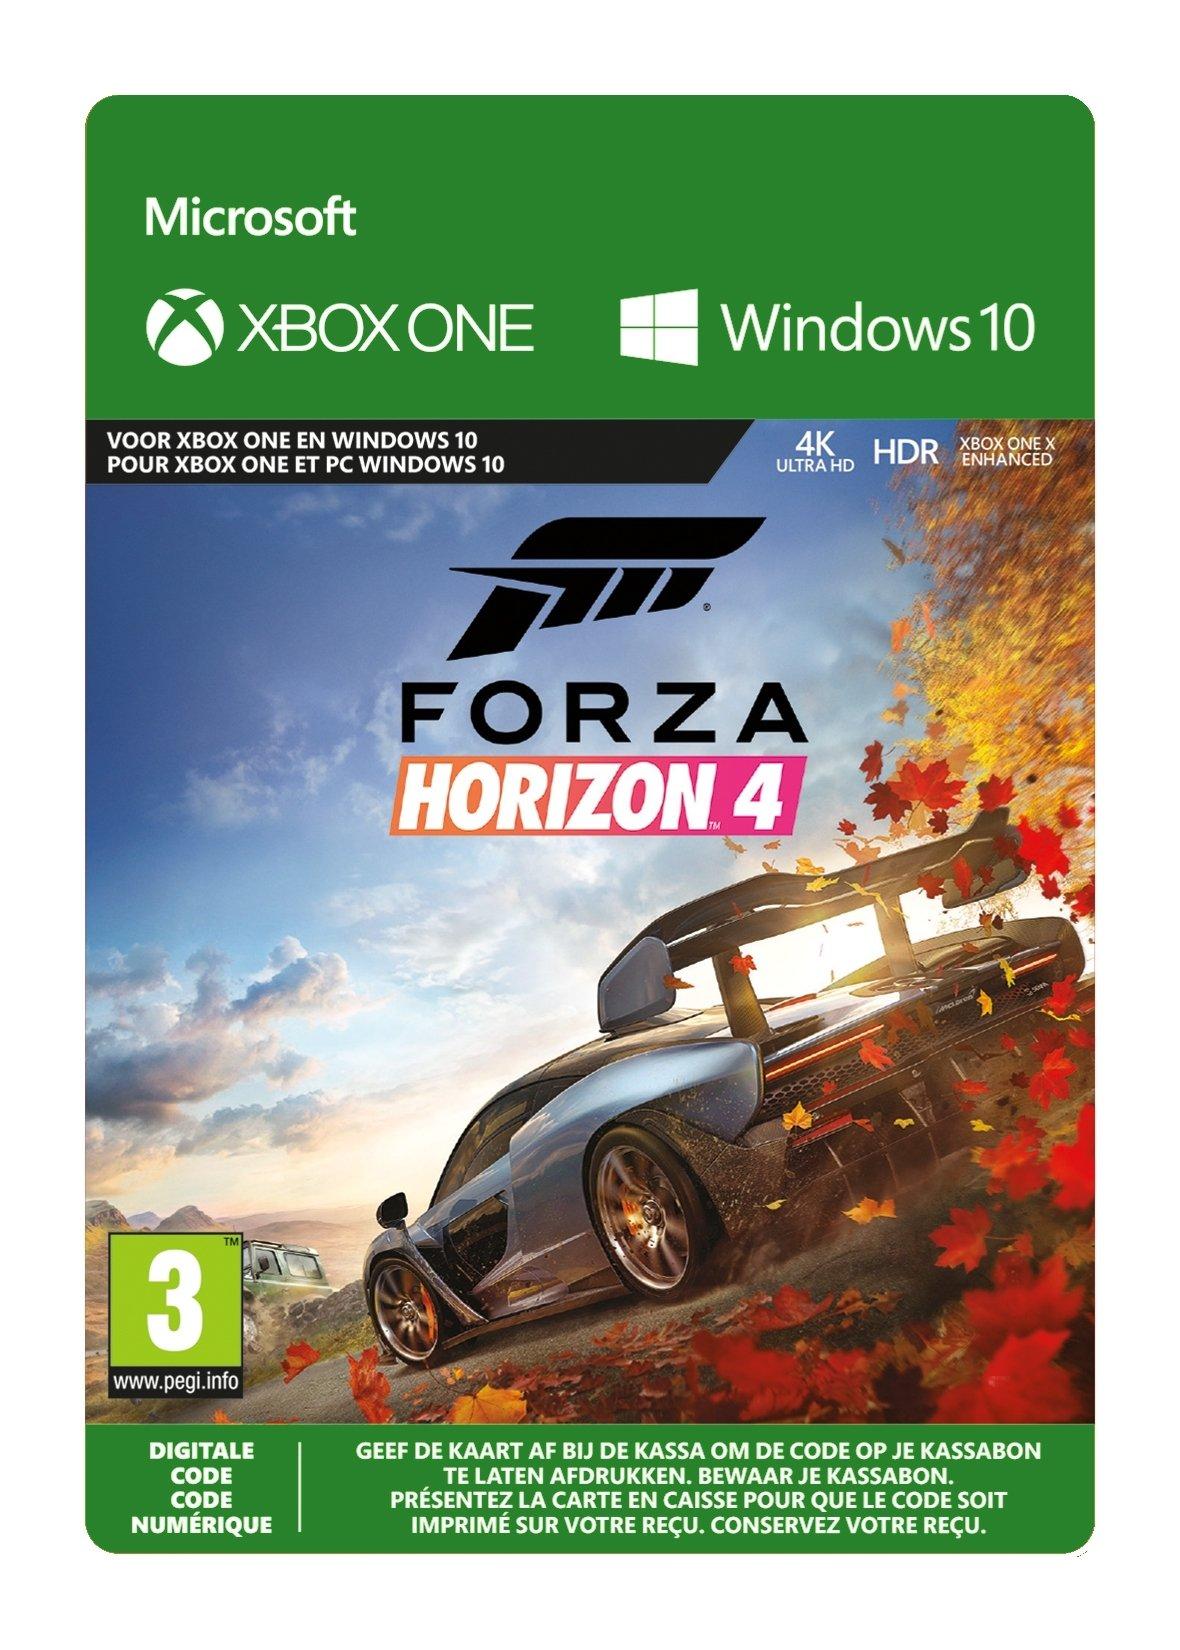 Forza Horizon 4: Standard Edition - Xbox One and Win 10 - Game | G7Q-00072 (3f059663-c40b-524b-be58-59fdf0a45ae3)